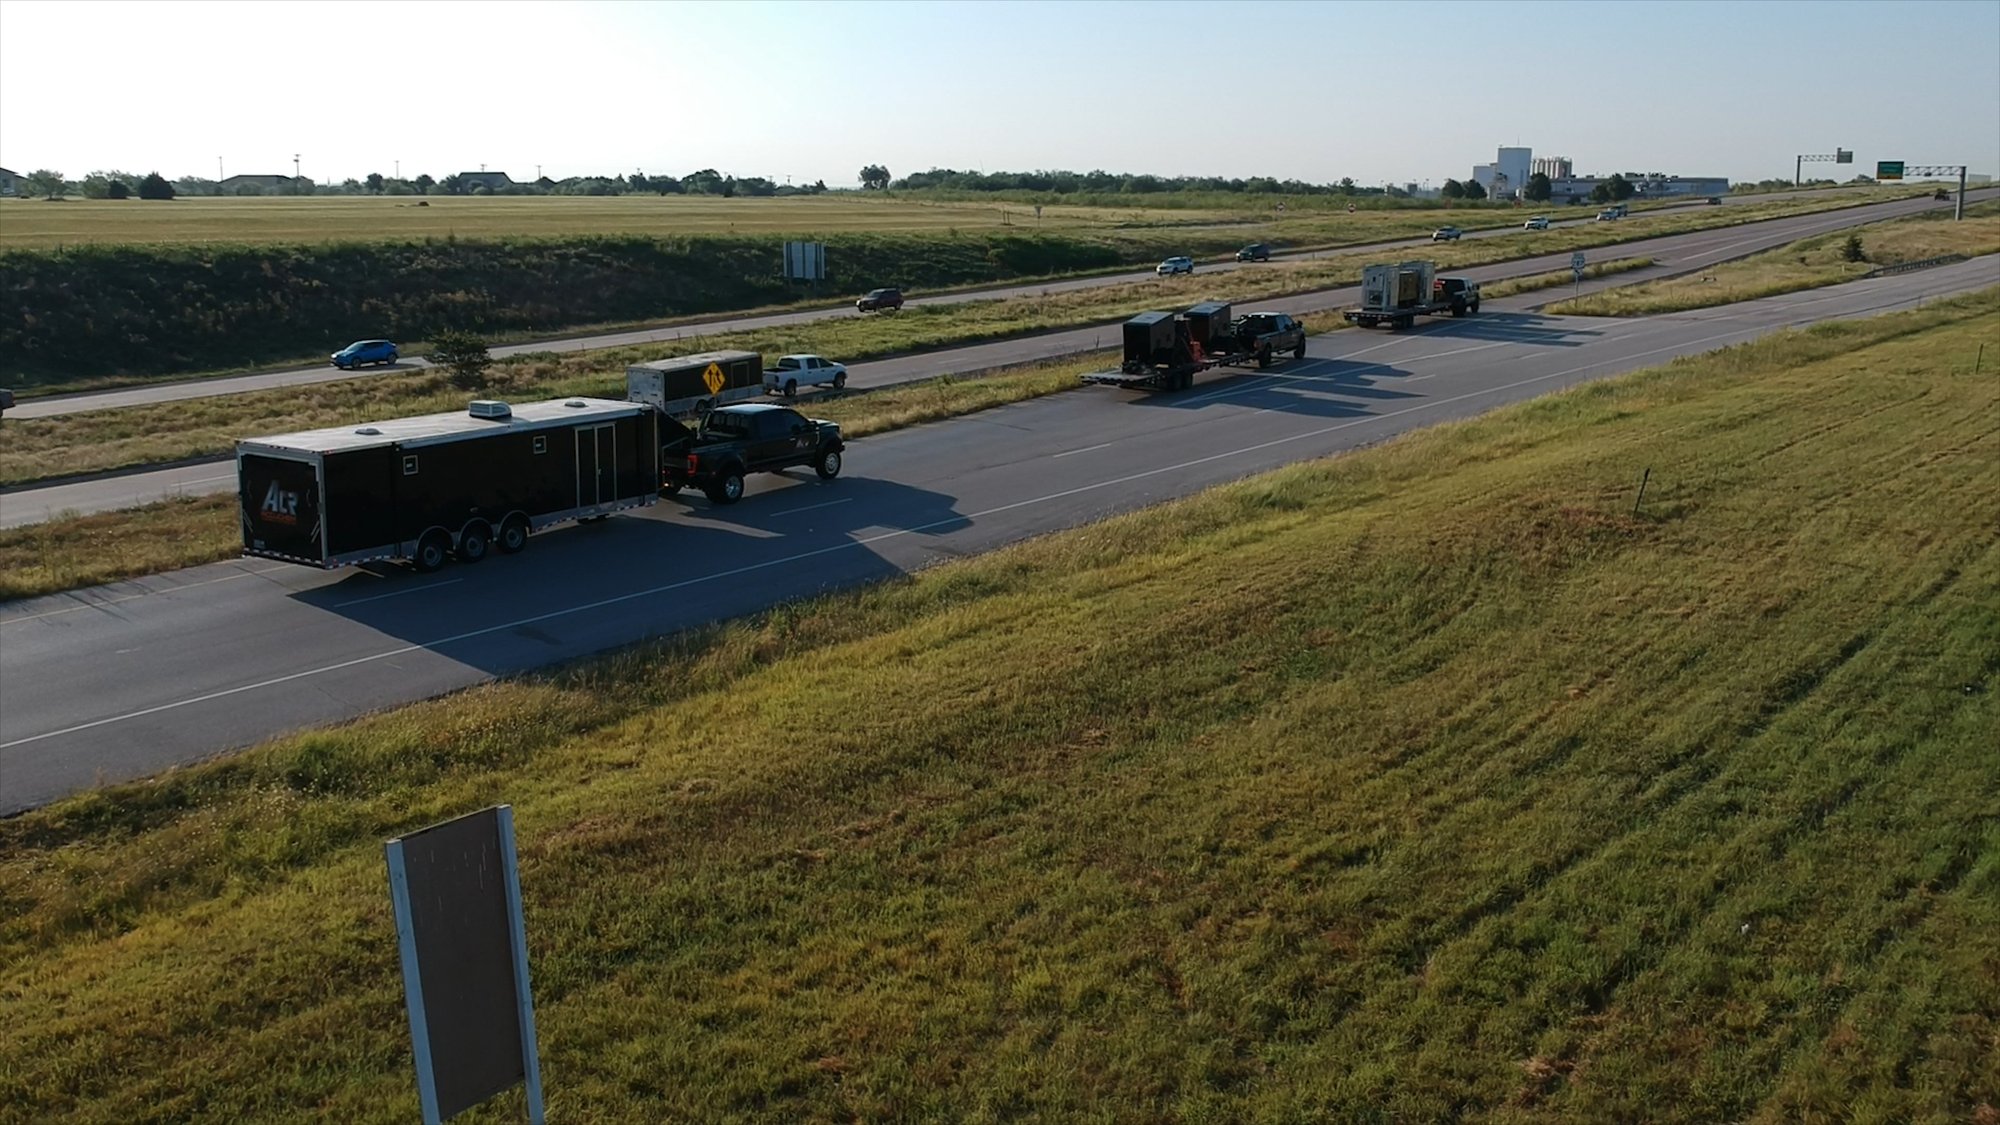 Emergency response trucks and trailers on the interstate